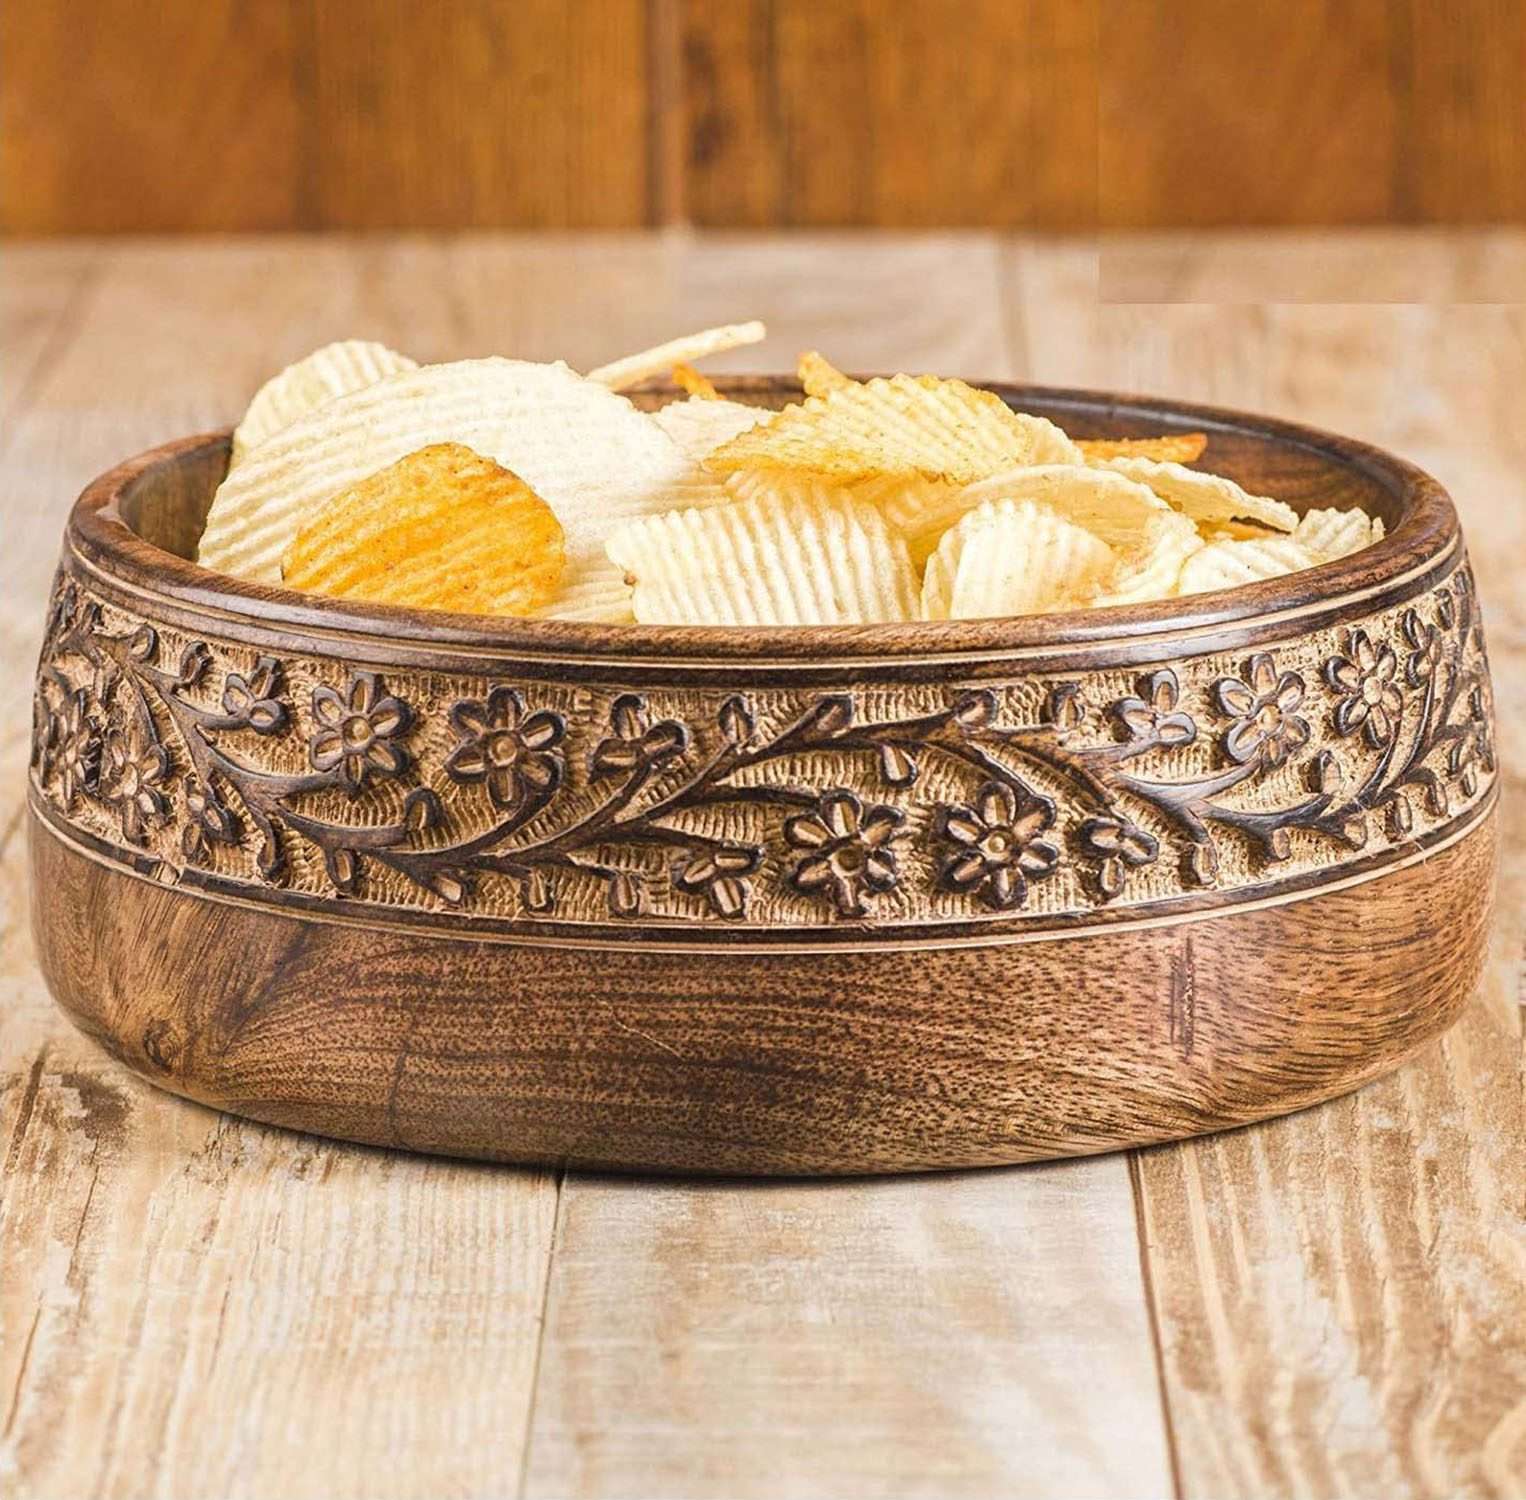 Handcrafted Wooden Serving Tray| Wooden Serving Tray For Snacks Bowl,Salad Bowl |Mango Wood with Hand Carved